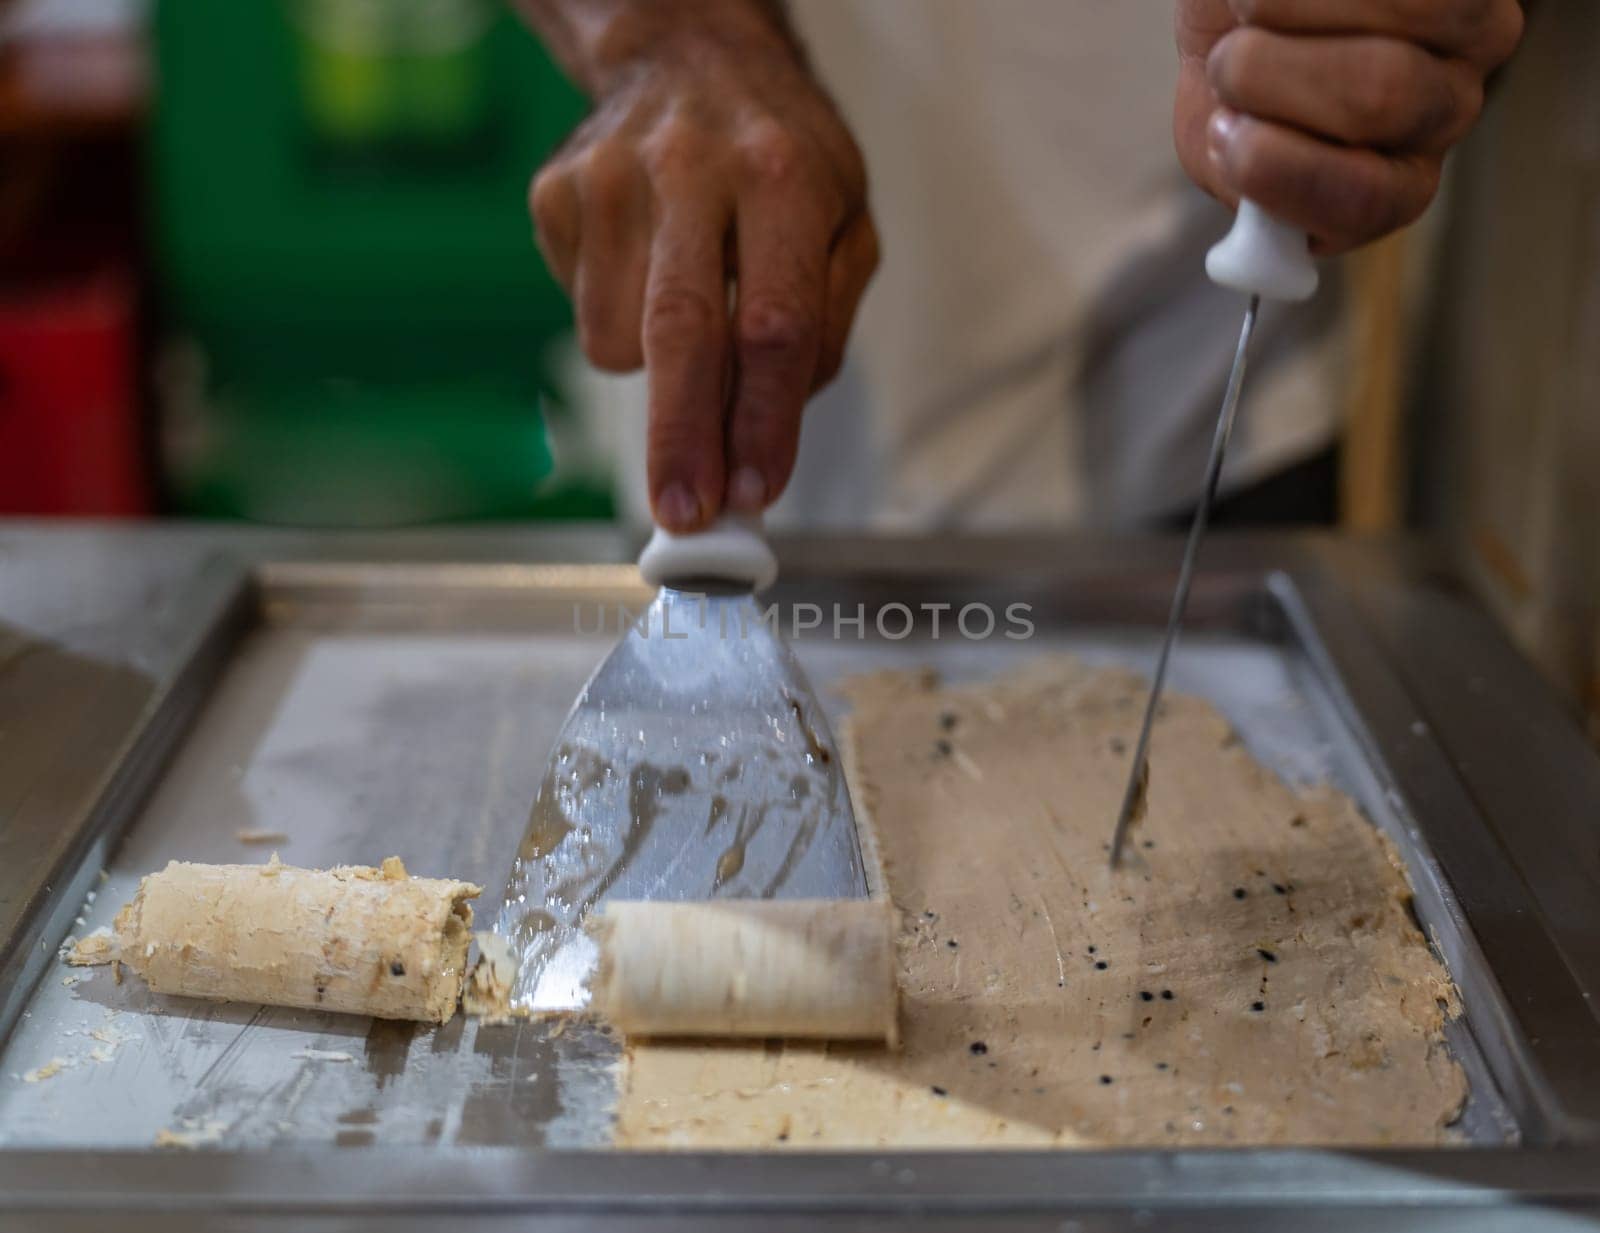 Artisan Crafting Rolled Ice Cream on a Hot Plate Indoors by FerradalFCG